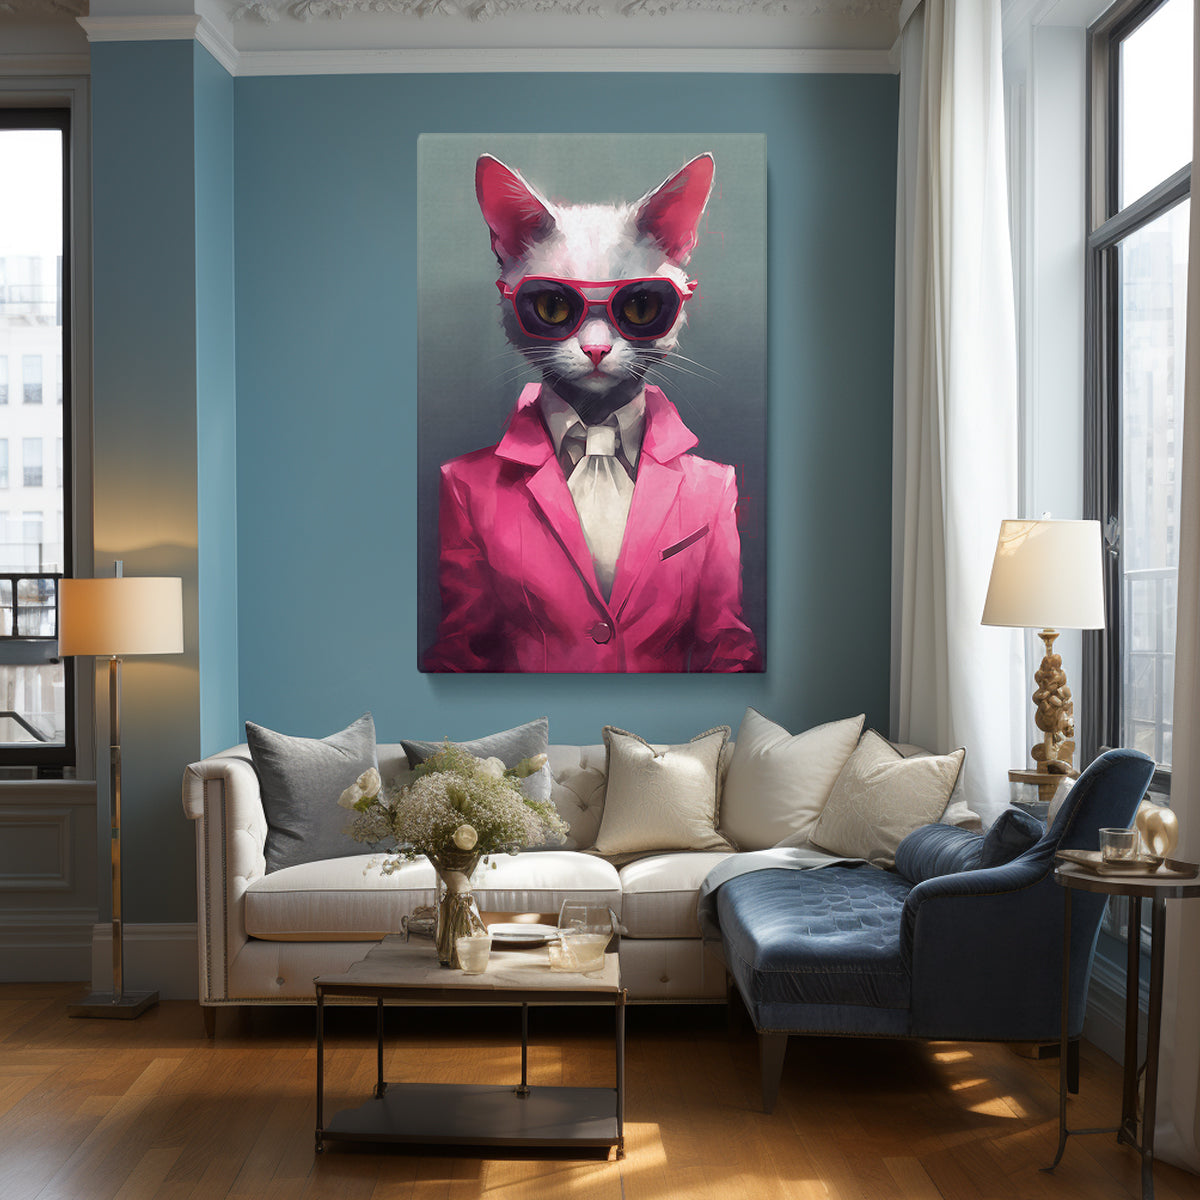 Chic Cat in Pink Suit Canvas Prints Artesty 1 Panel 35"x55" 